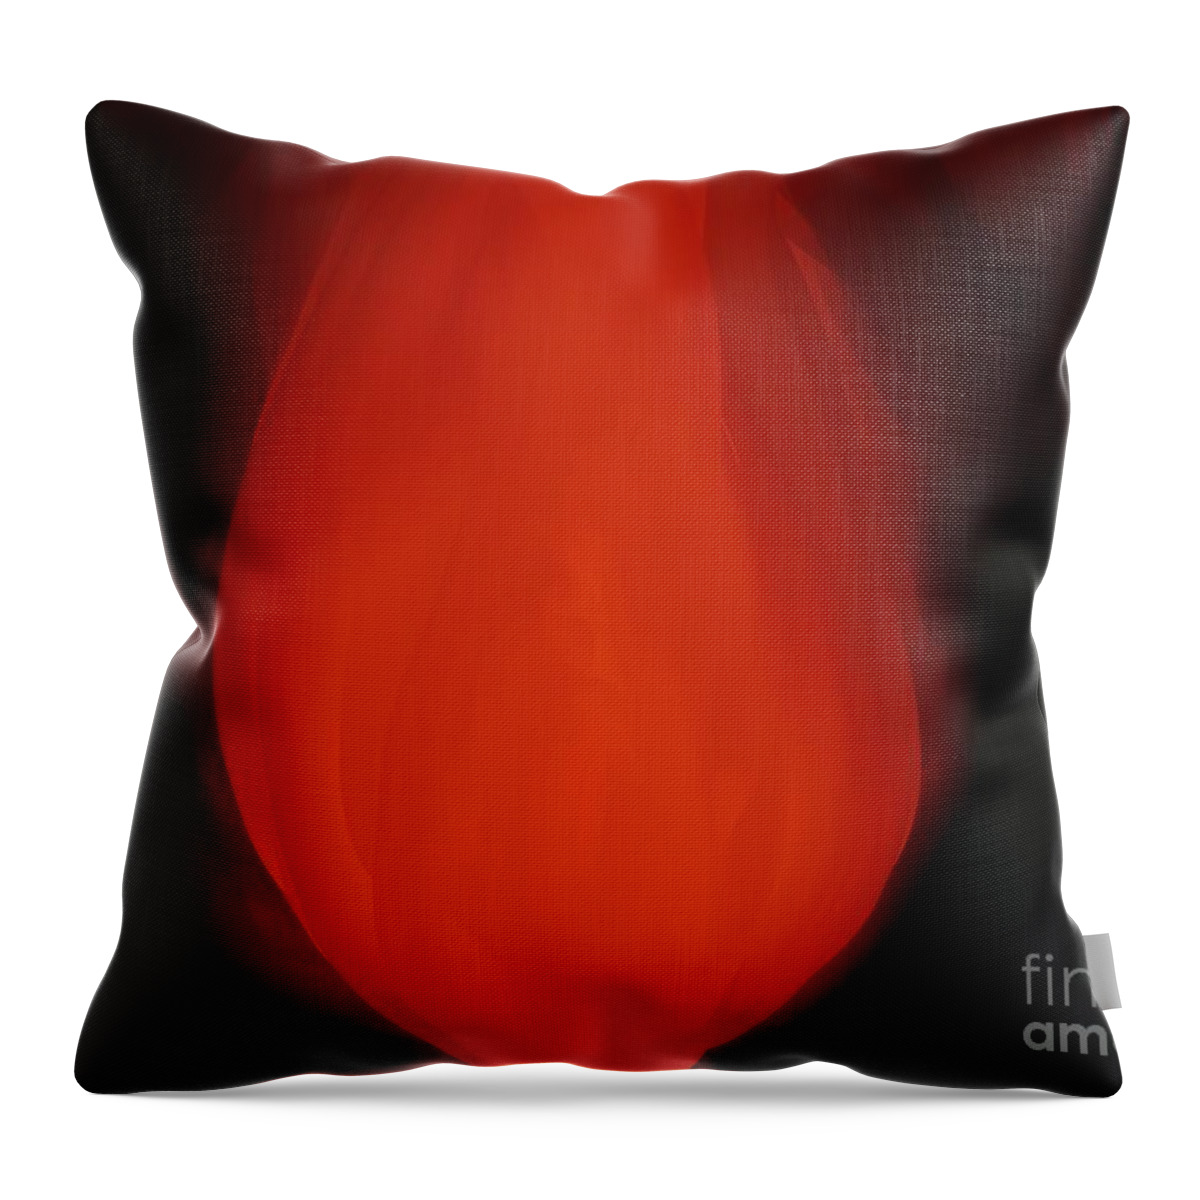 Orange And Black Art Throw Pillow featuring the painting Within The Flame by Roxy Riou